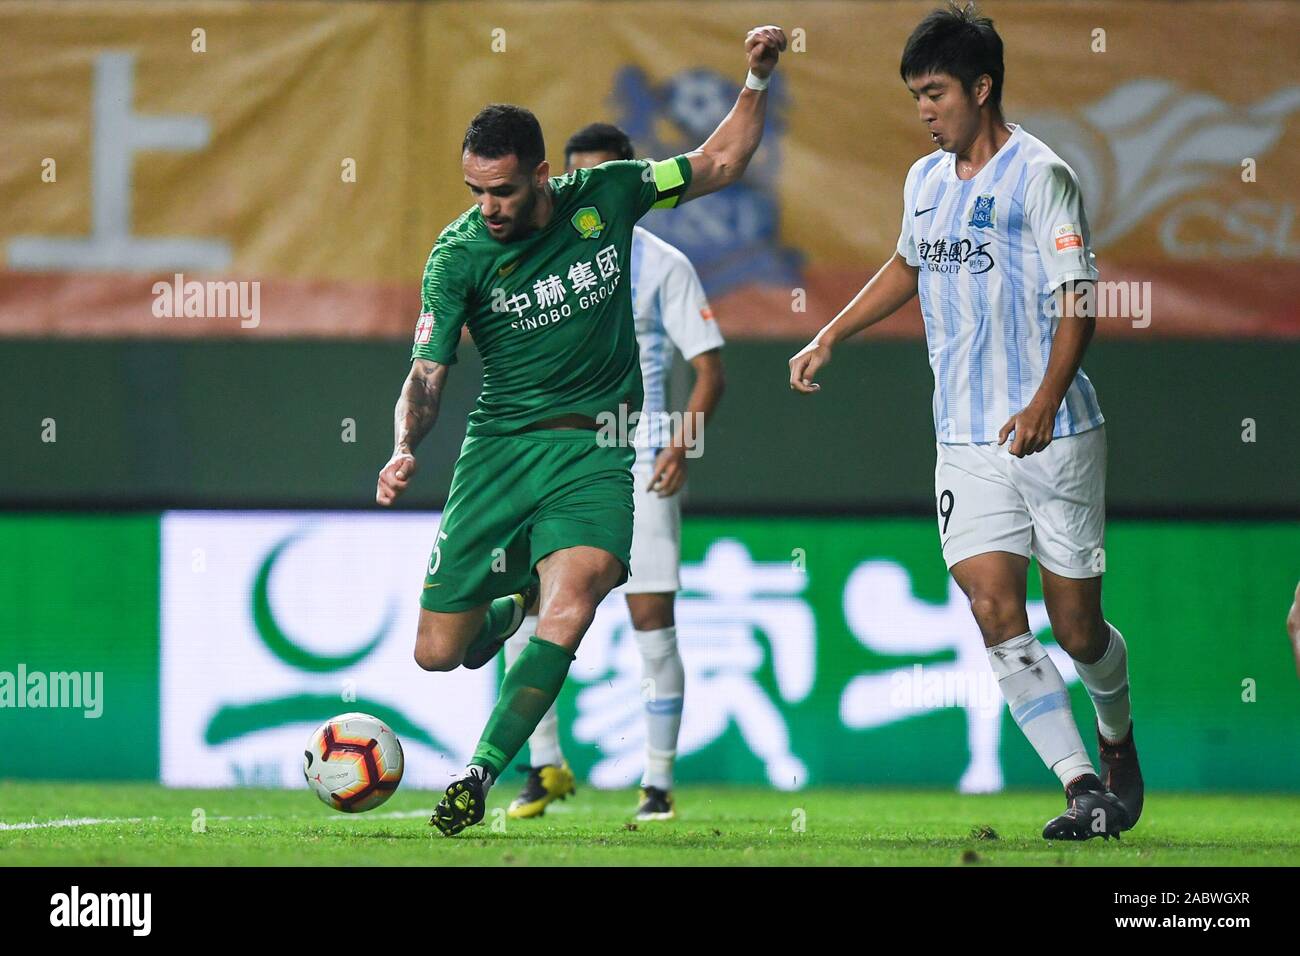 Brazilian football player Renato Soares de Oliveira Augusto, or simply Renato Augusto, of Beijing Sinobo Guoan F.C., left, shoots during the 29th round match of Chinese Football Association Super League (CSL) against Guangzhou R&F in Guangzhou city, south China's Guangdong province, 27 November 2019. Guangzhou R&F slashed by Beijing Sinobo Guoan with 1-4. Stock Photo